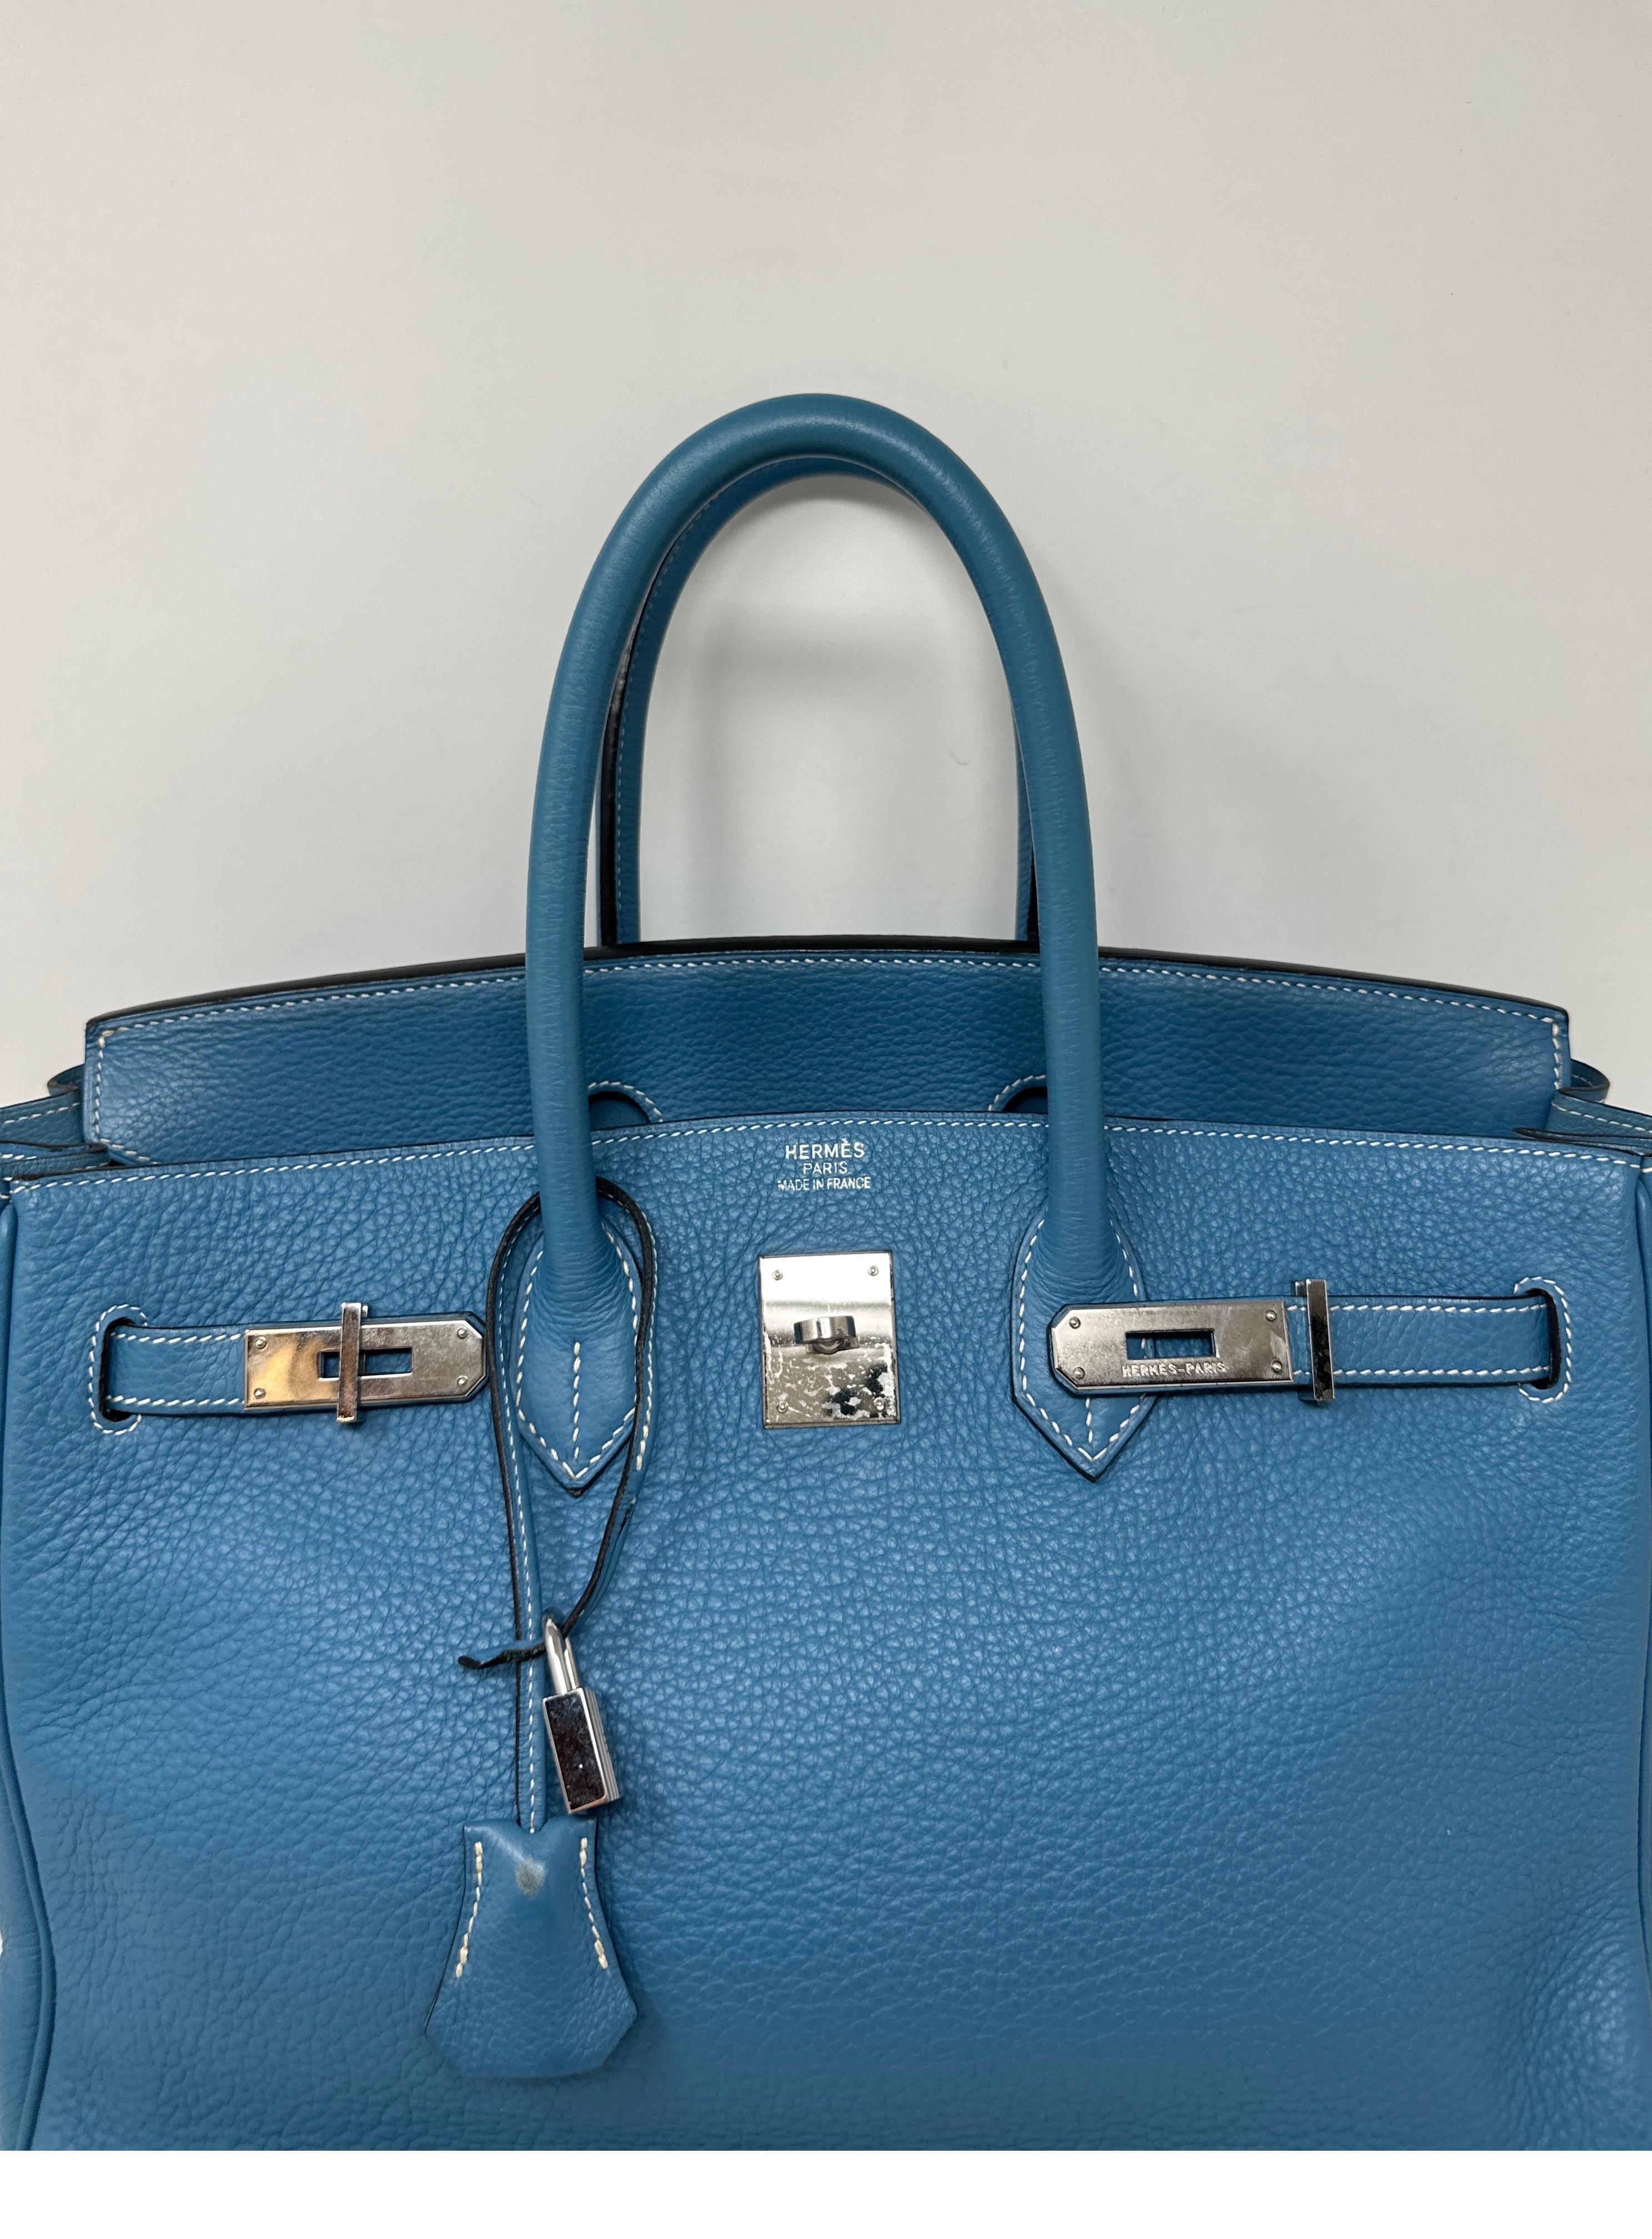 Hermes Blue Jean Birkin 35 Bag  In Good Condition For Sale In Athens, GA